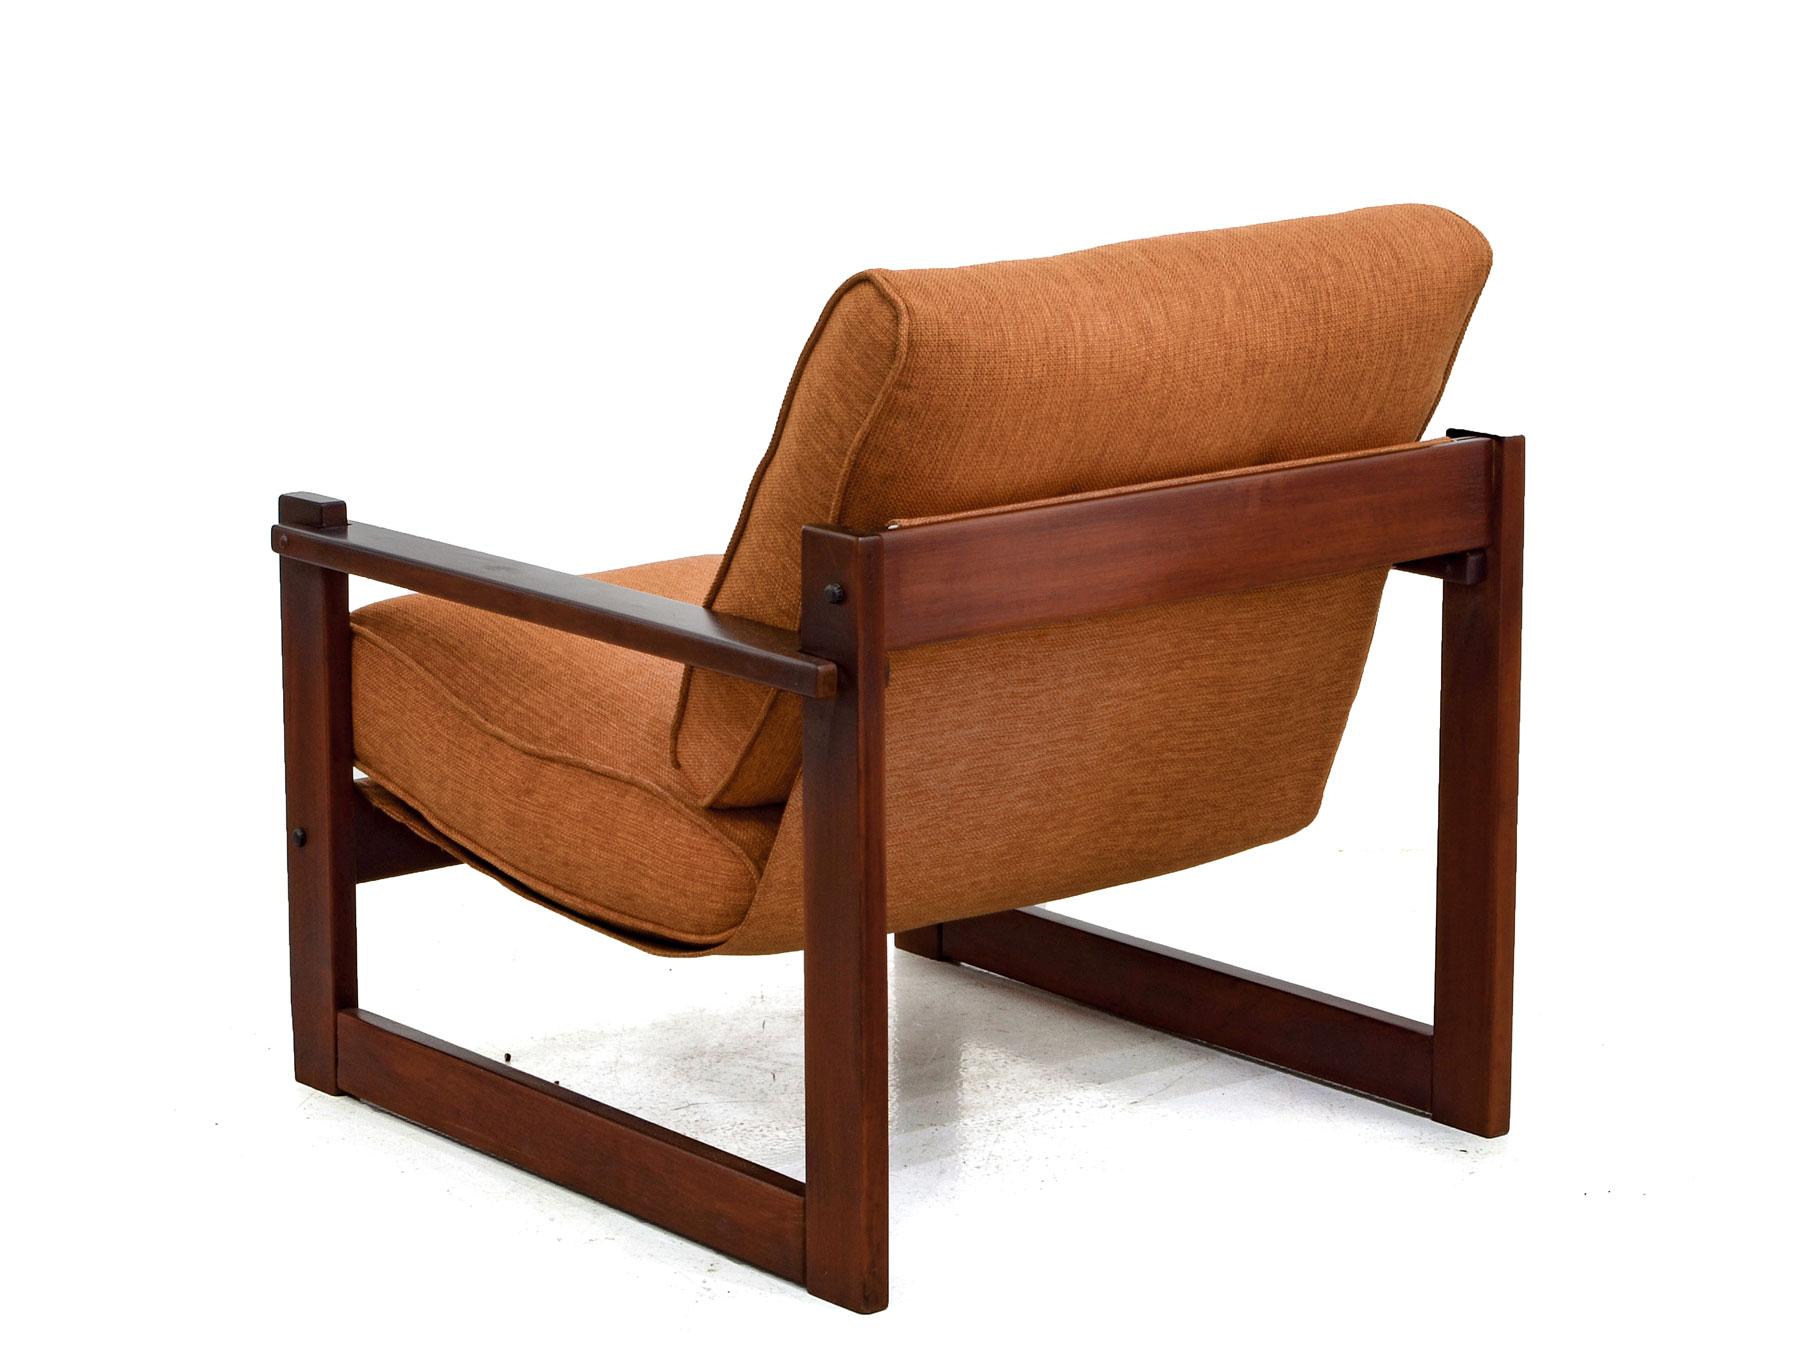 Brazilian Pair of Armchairs in Rosewood, by Percival Lafer, Mid-Century Modern